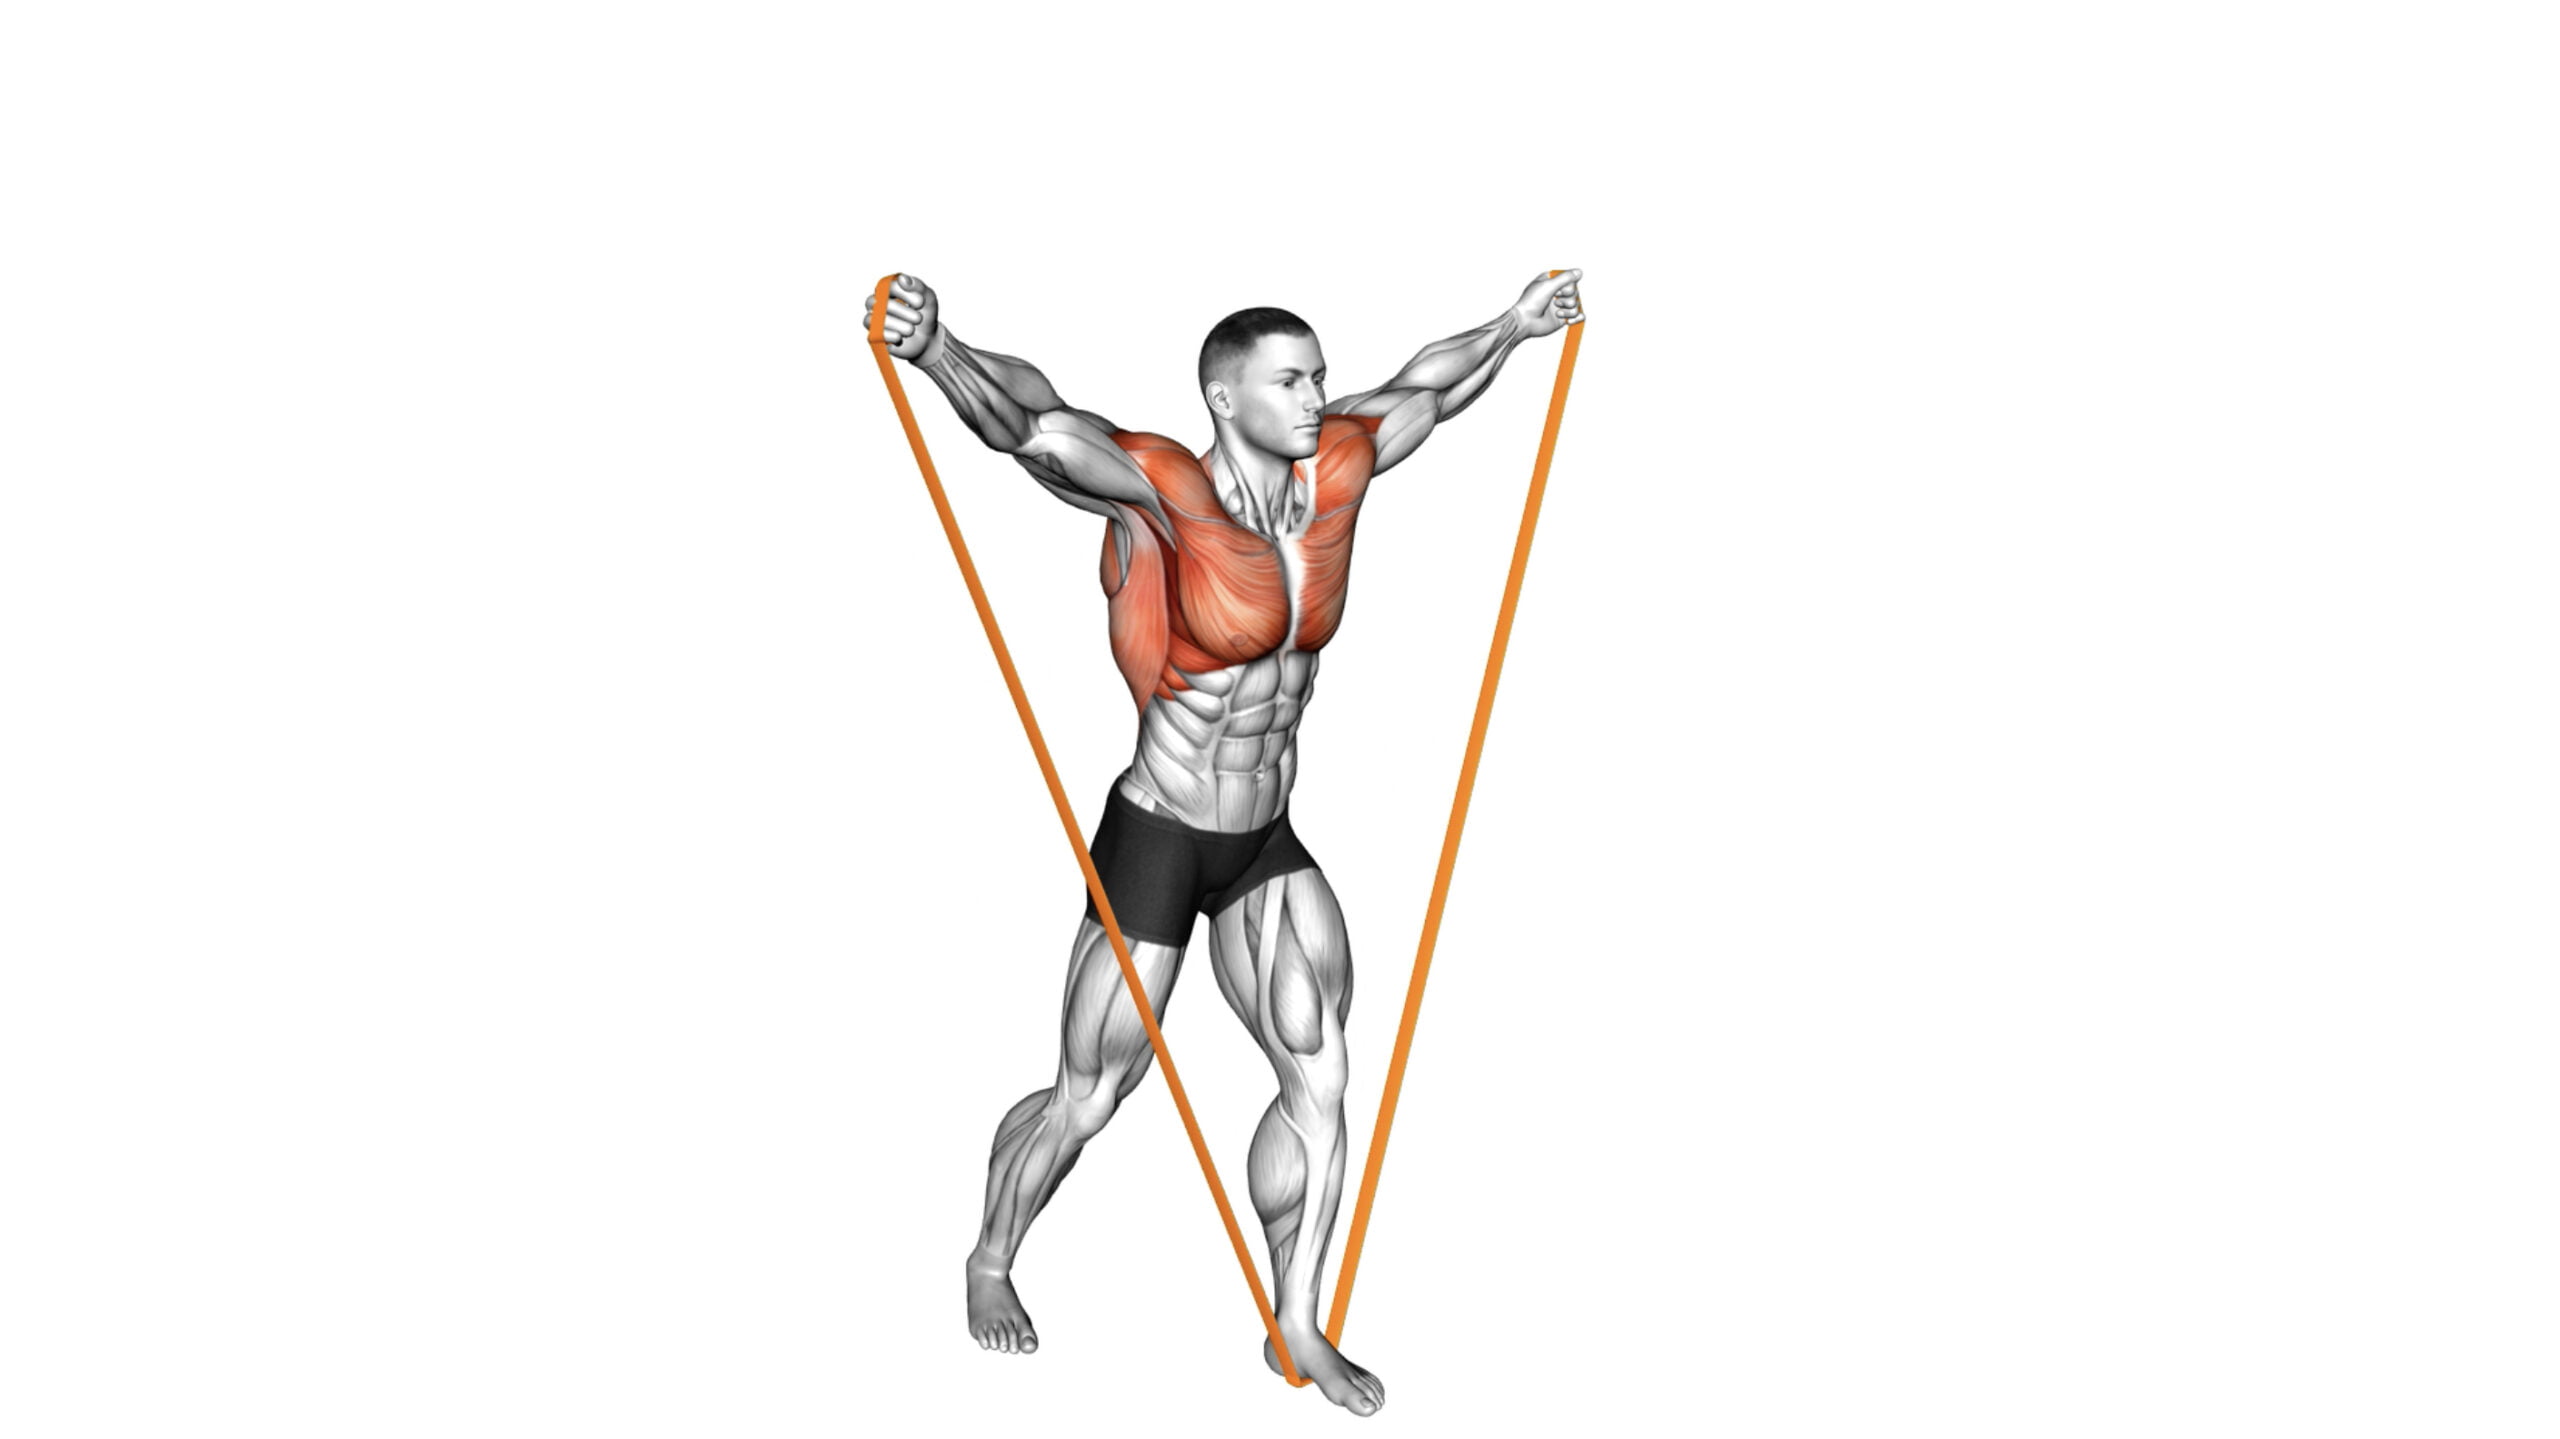 10 Resistance Bands Exercises For Seniors: Improve Strength And Mobility With These Simple Workouts